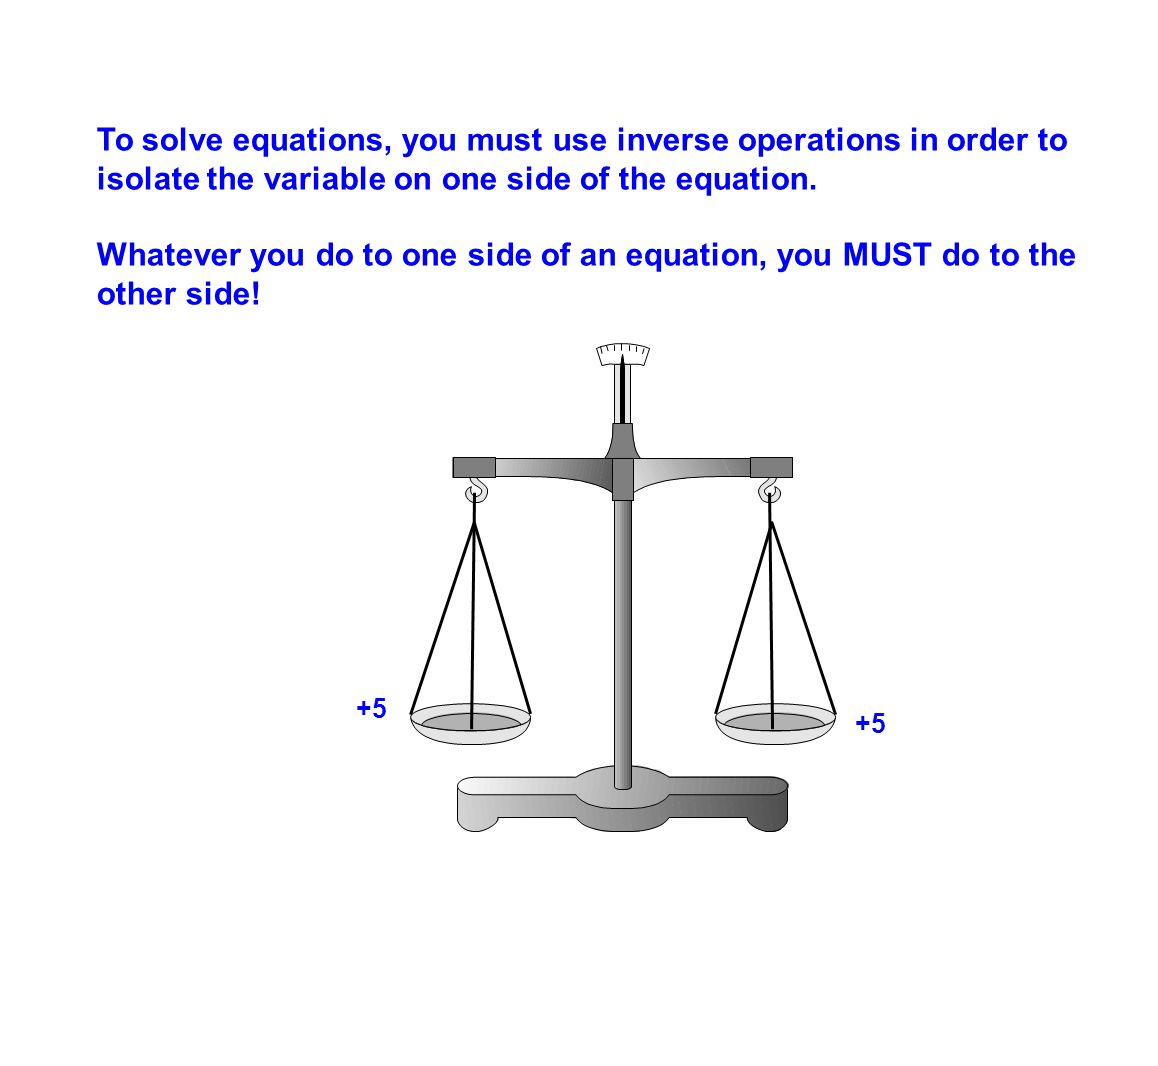 To solve equations, you must use inverse operations in order to isolate the variable on one side of the equation.